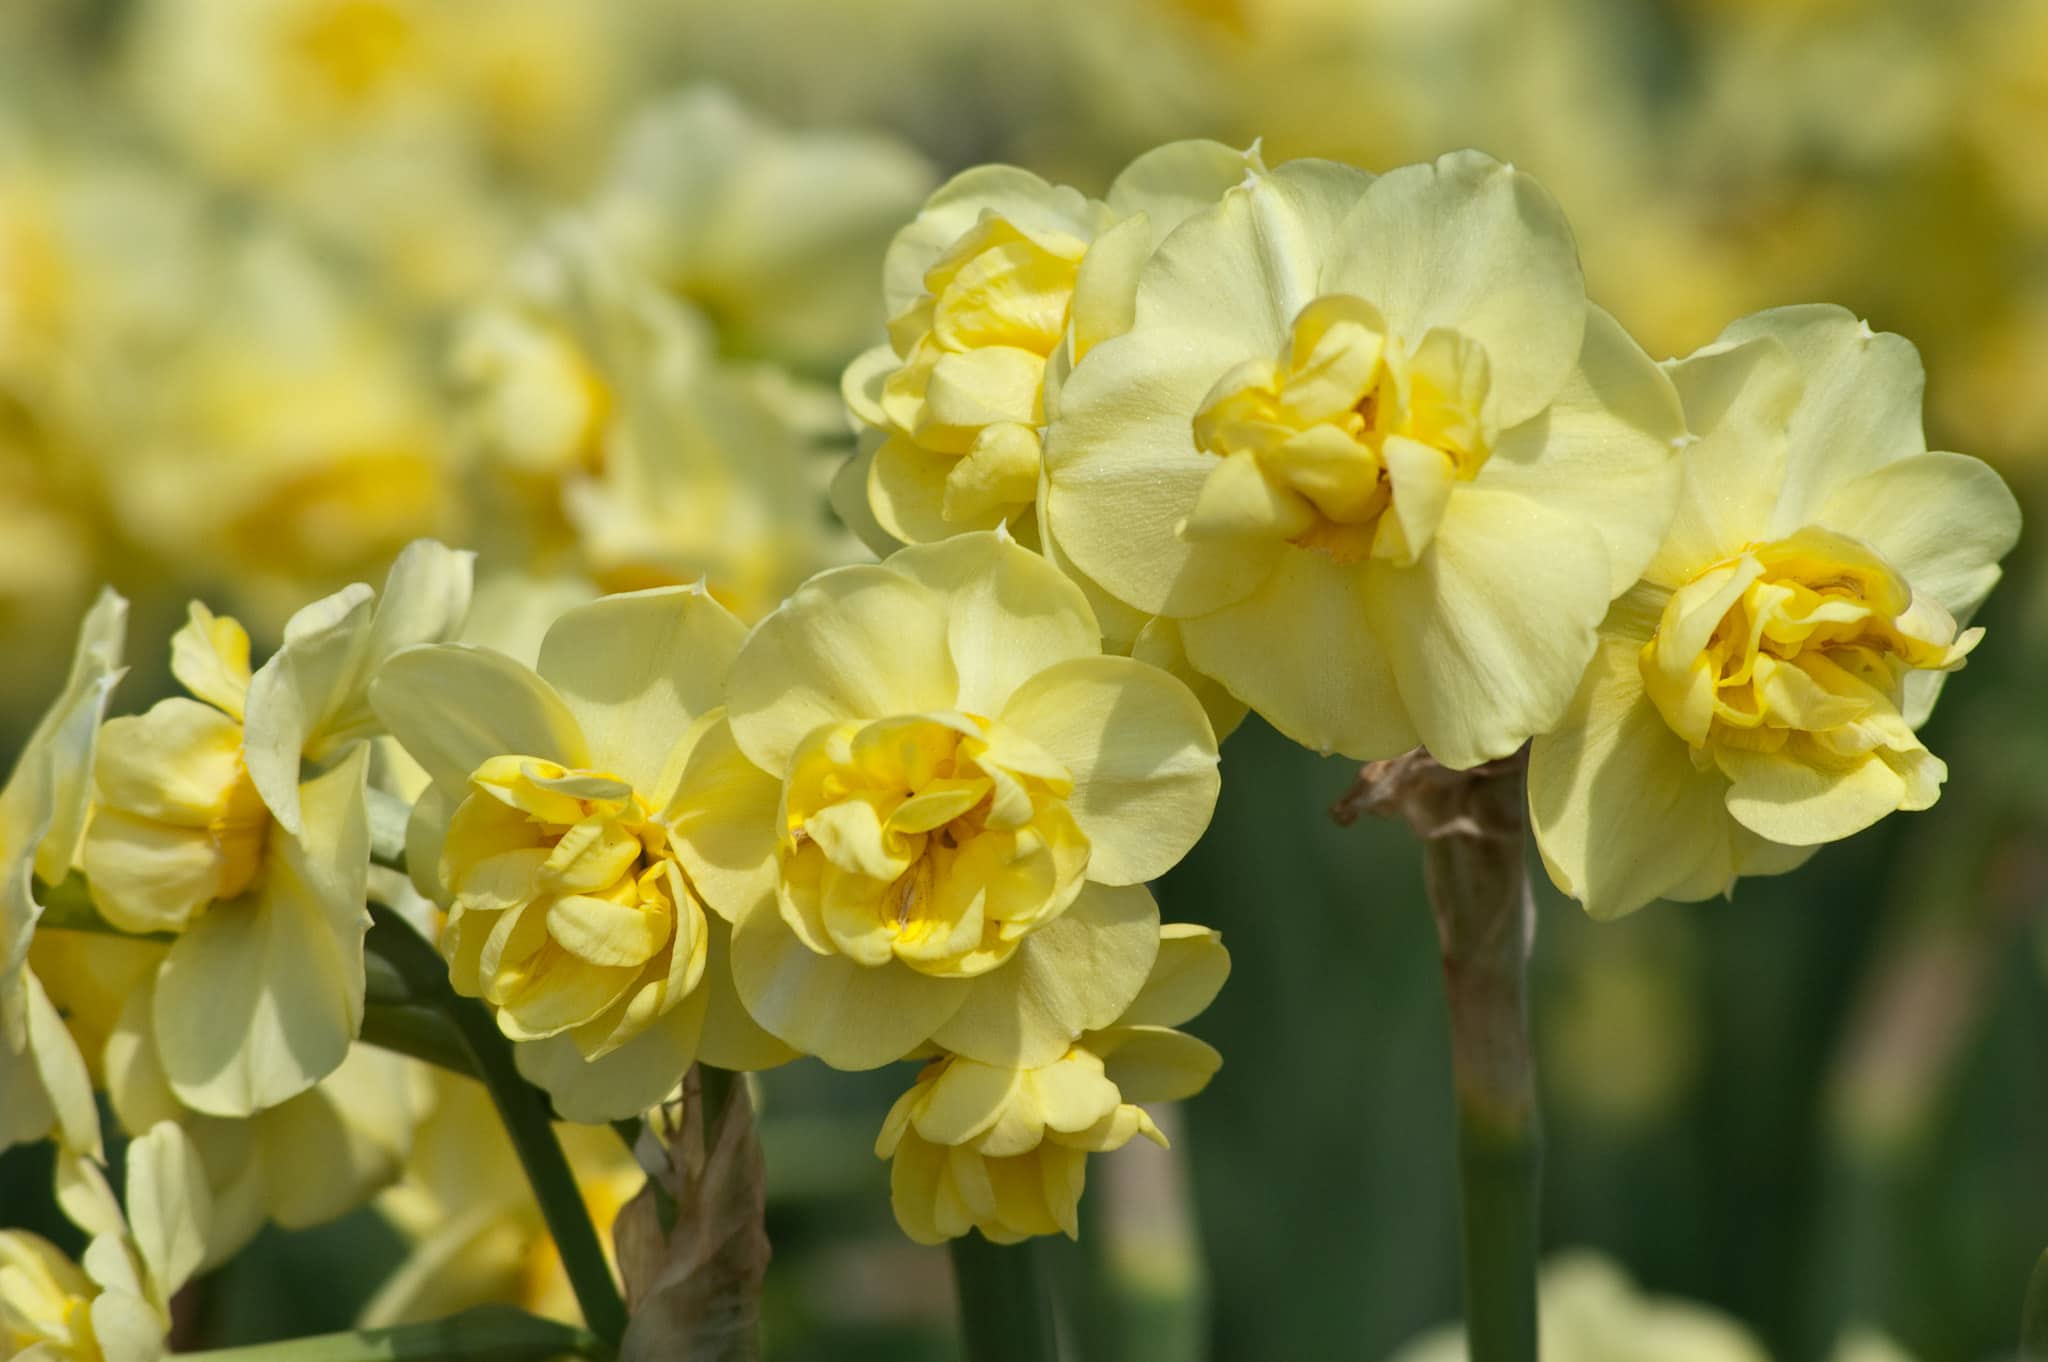 Daffodil Bulbs Item 3024 Yellow Cheerfulness For Sale Colorblends